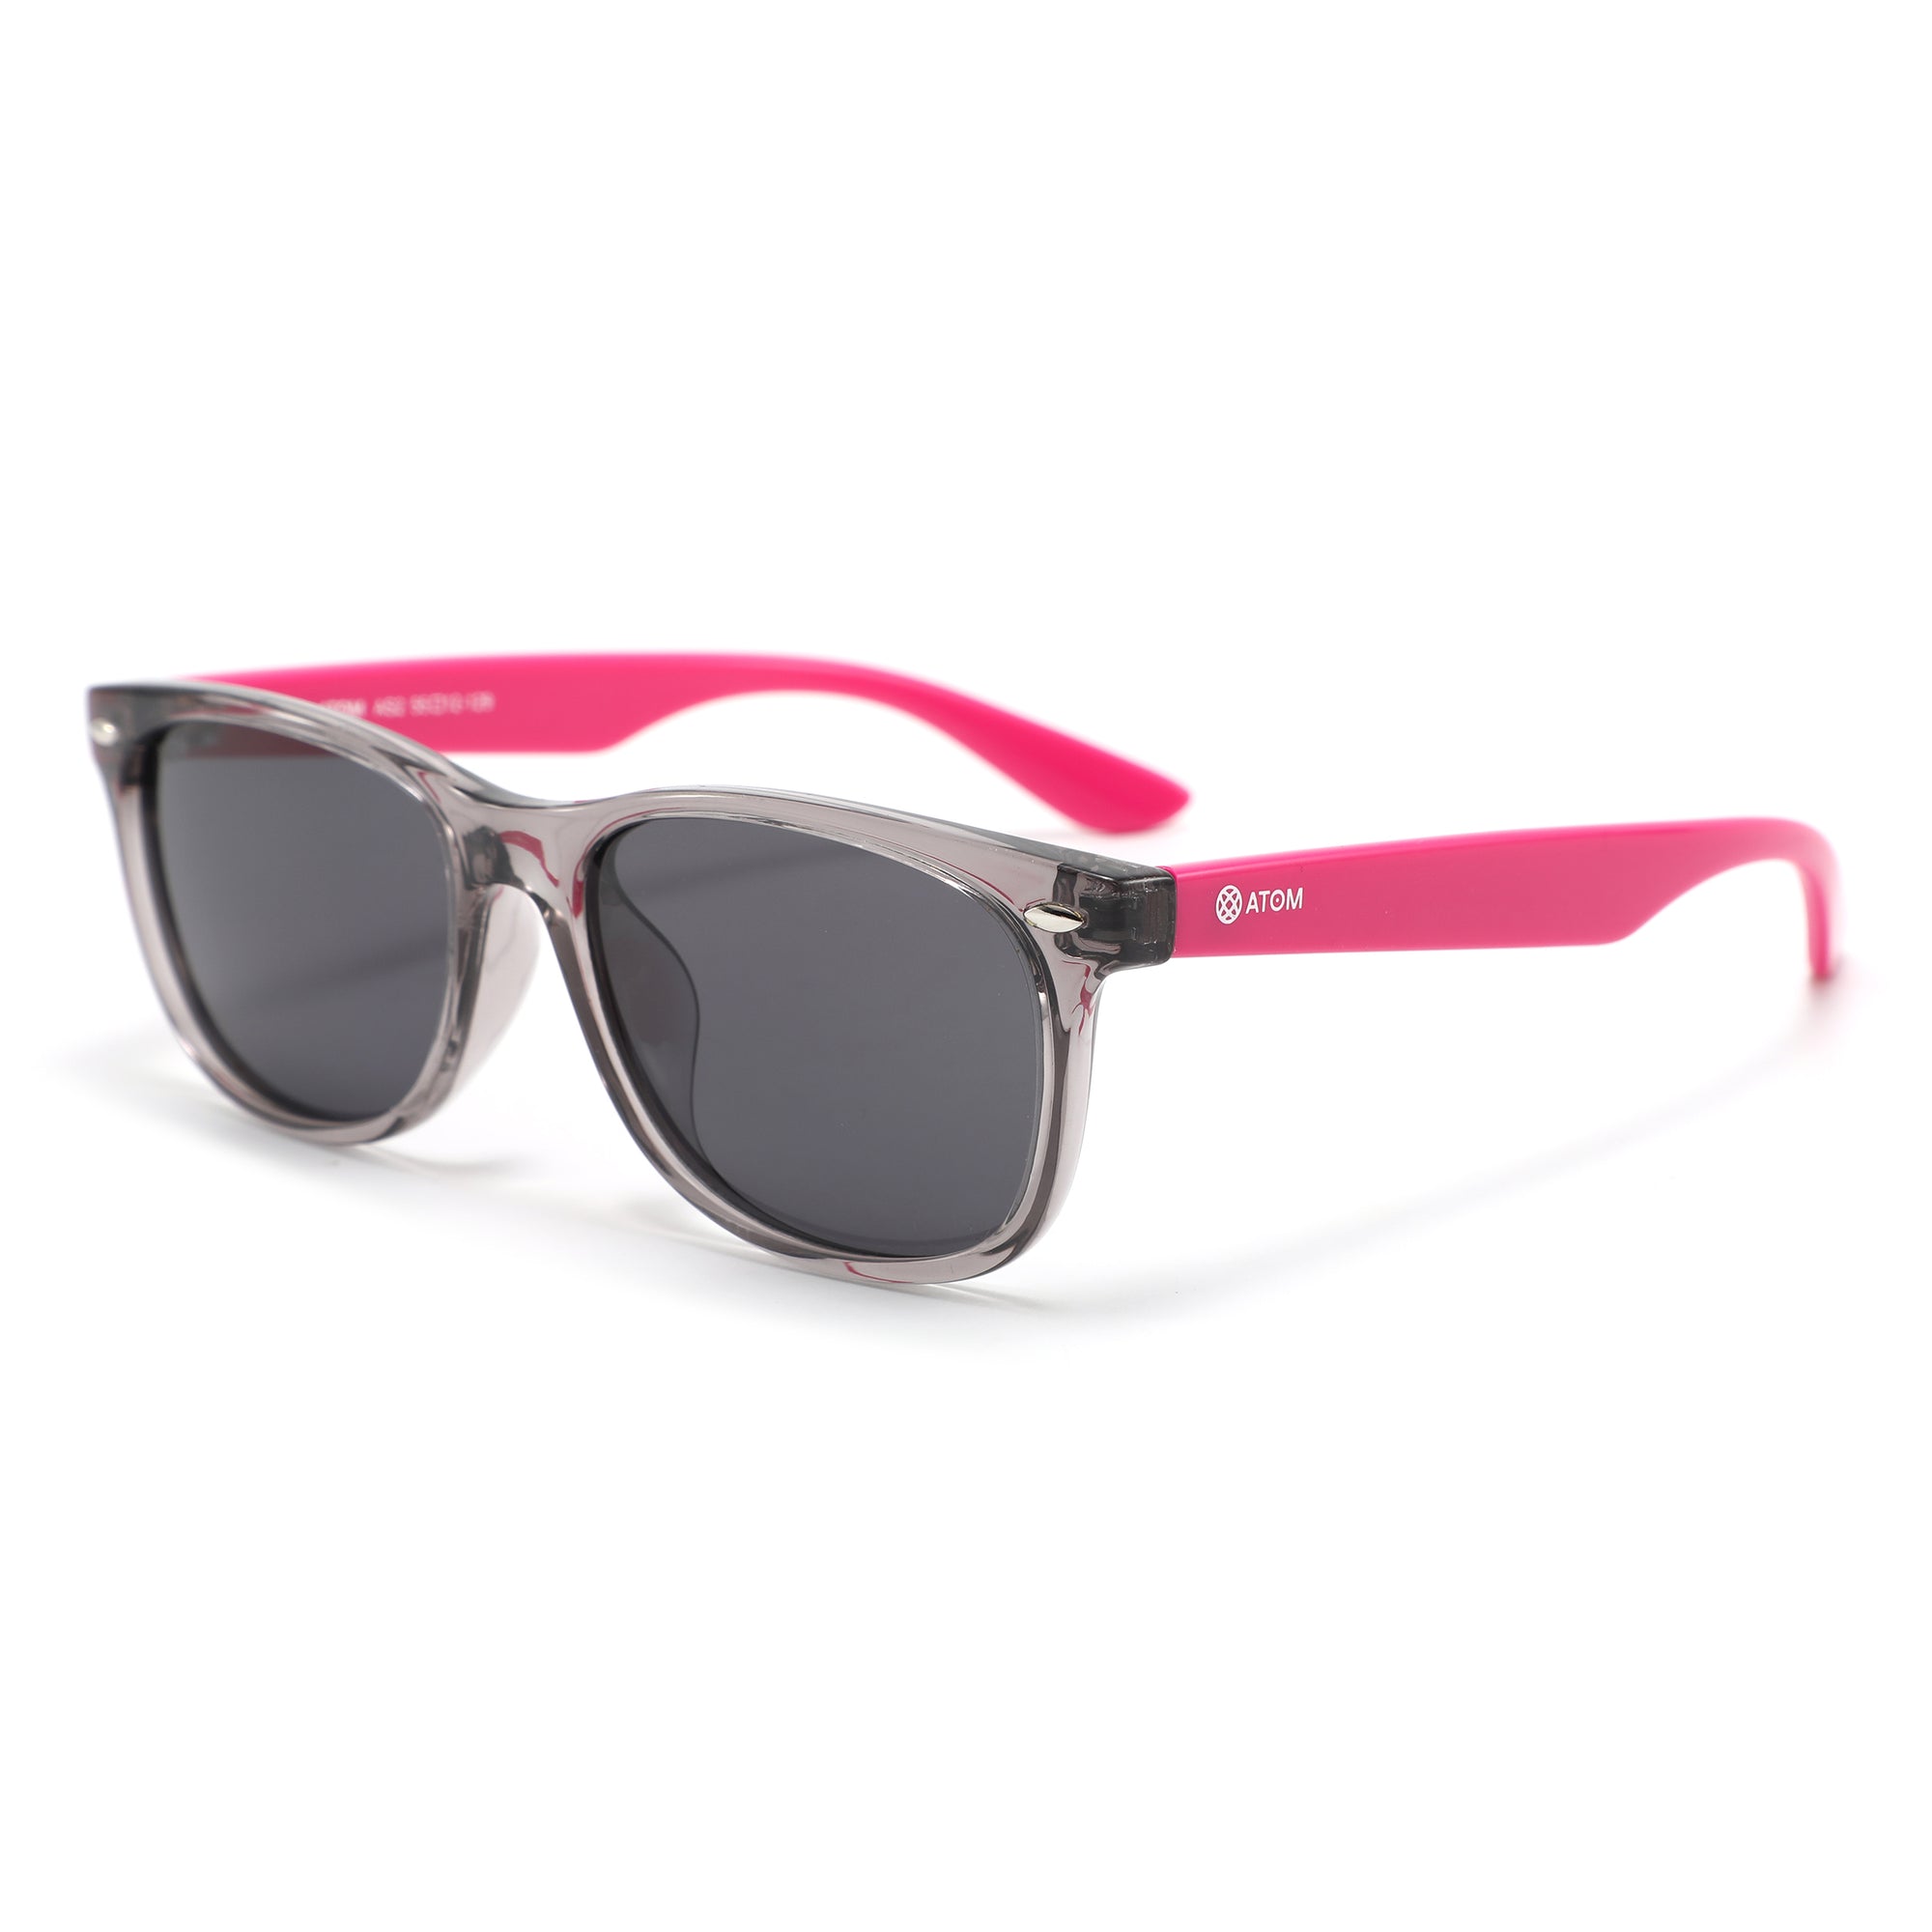 ATOM AS2-1 girls sunglasses with pink and grey frame and black lenses